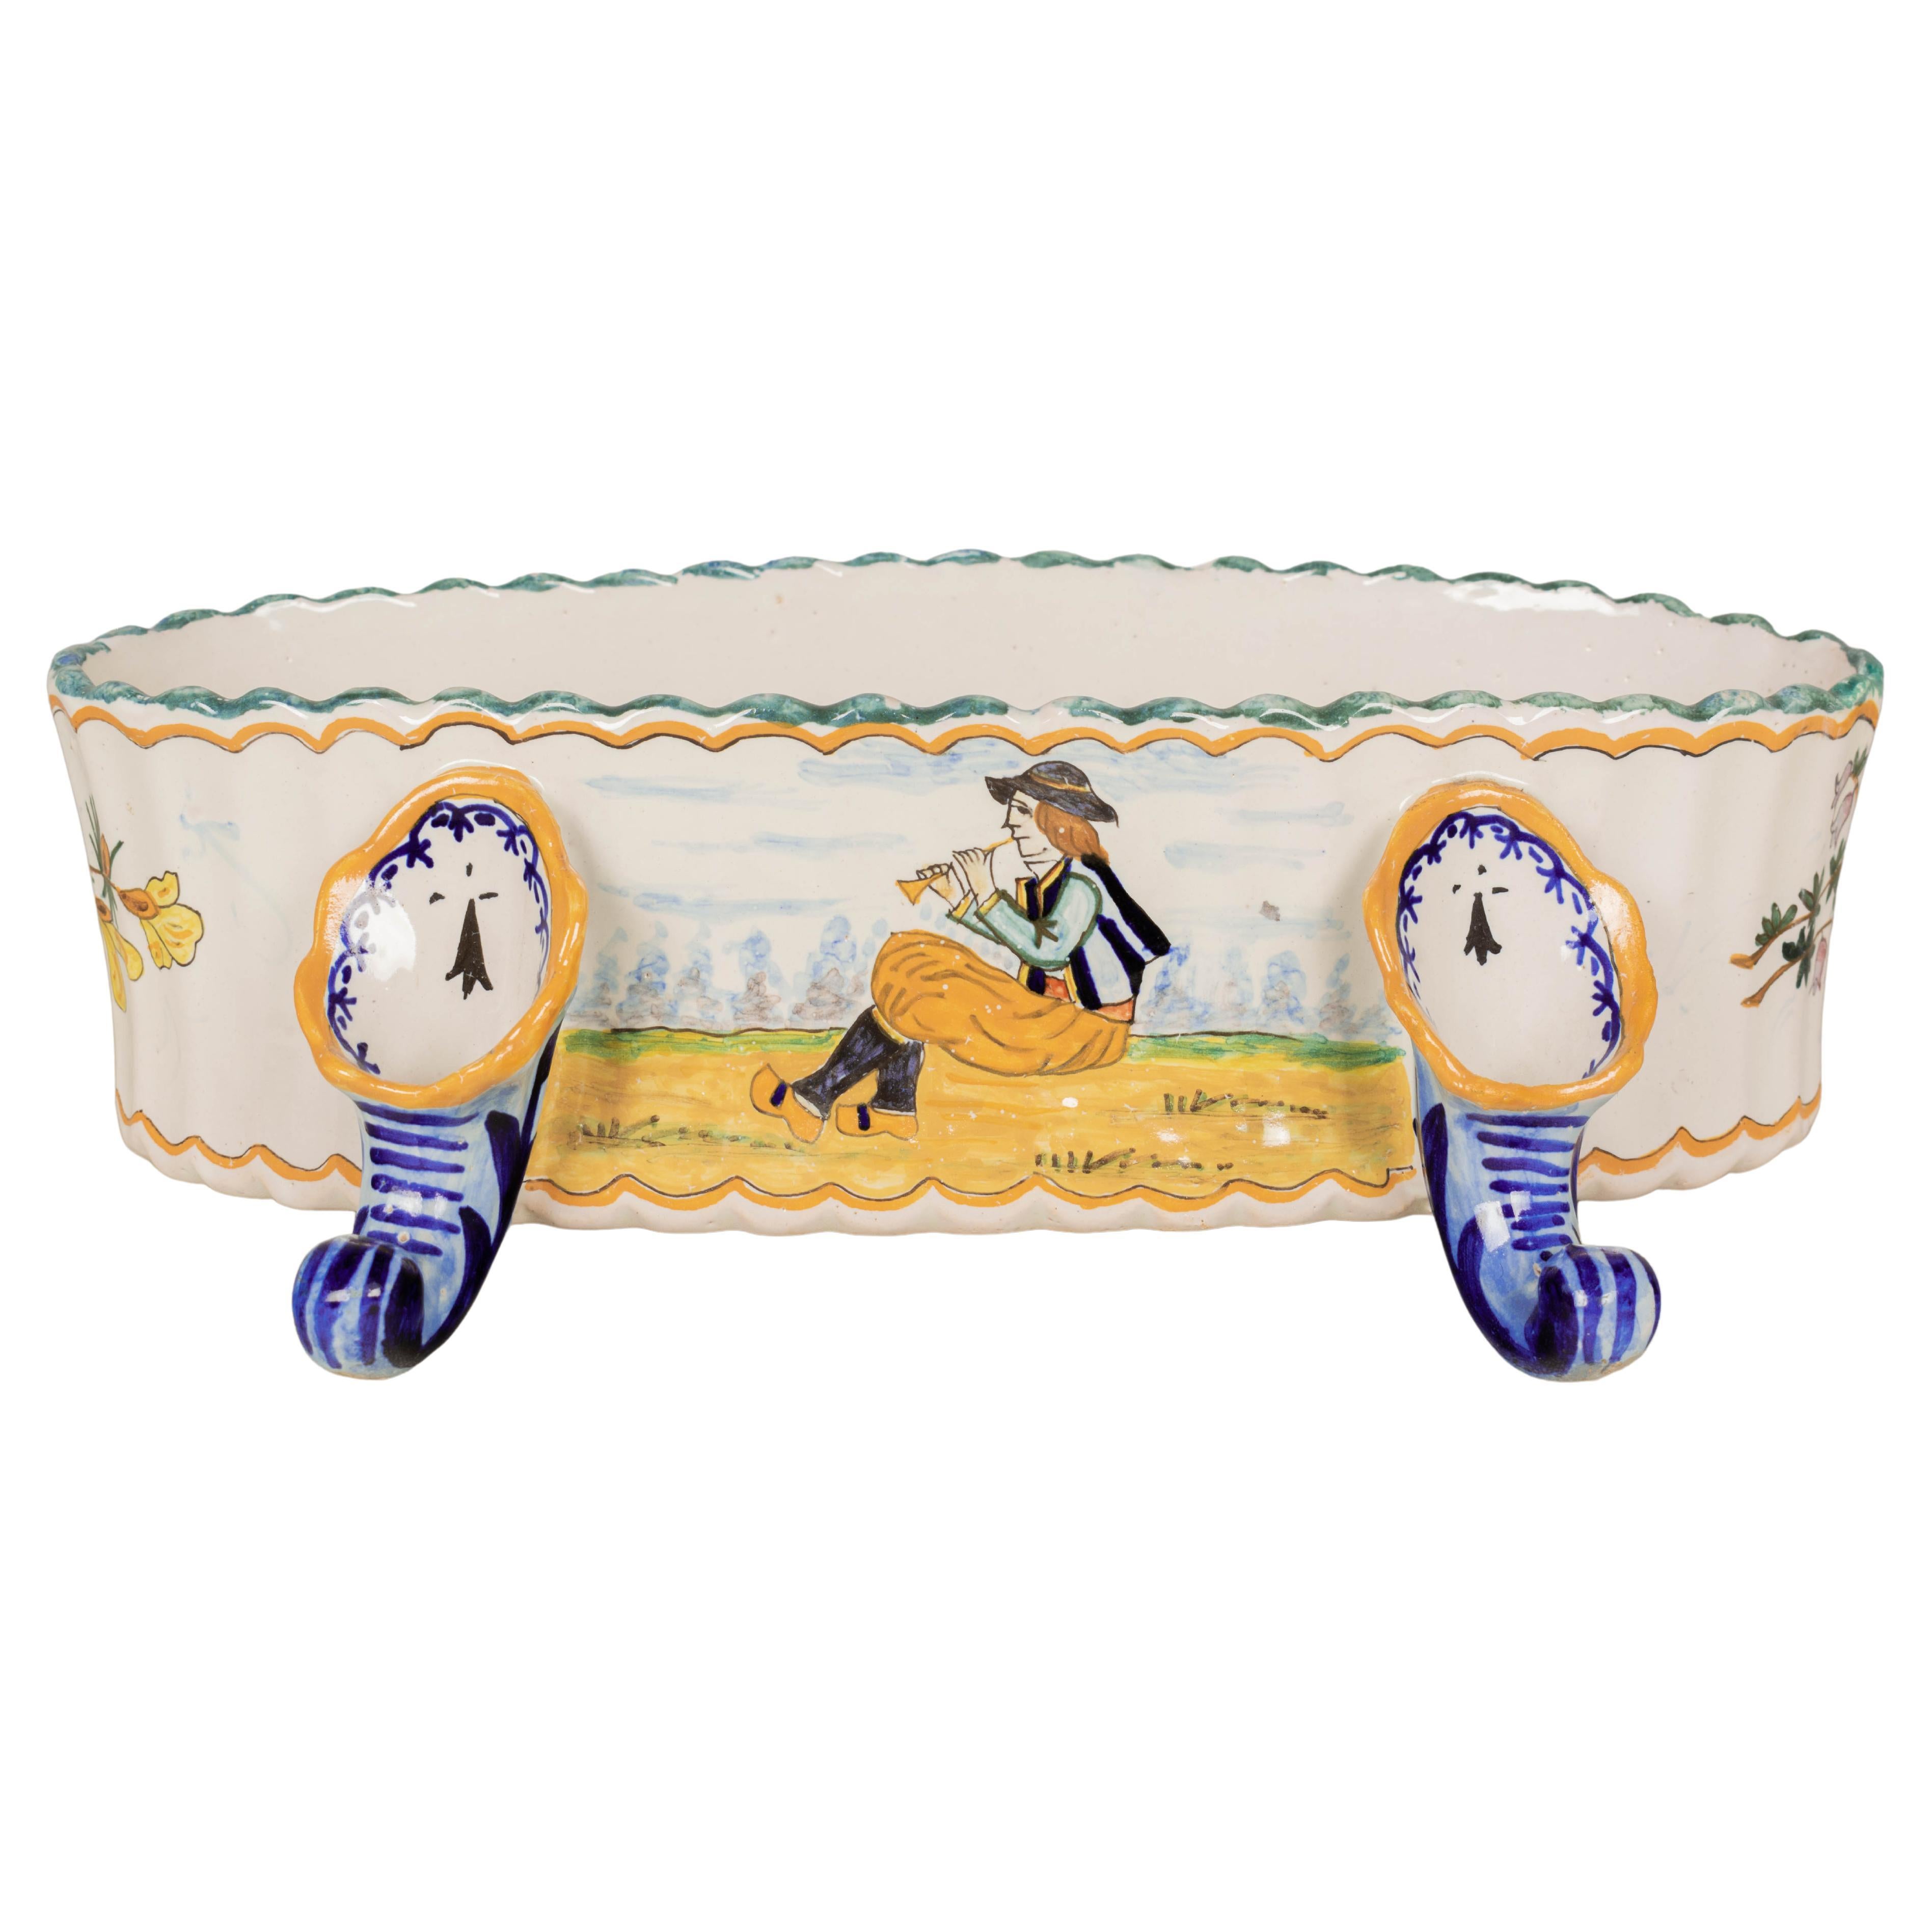 Henriot Quimper Footed Faience Jardiniere For Sale